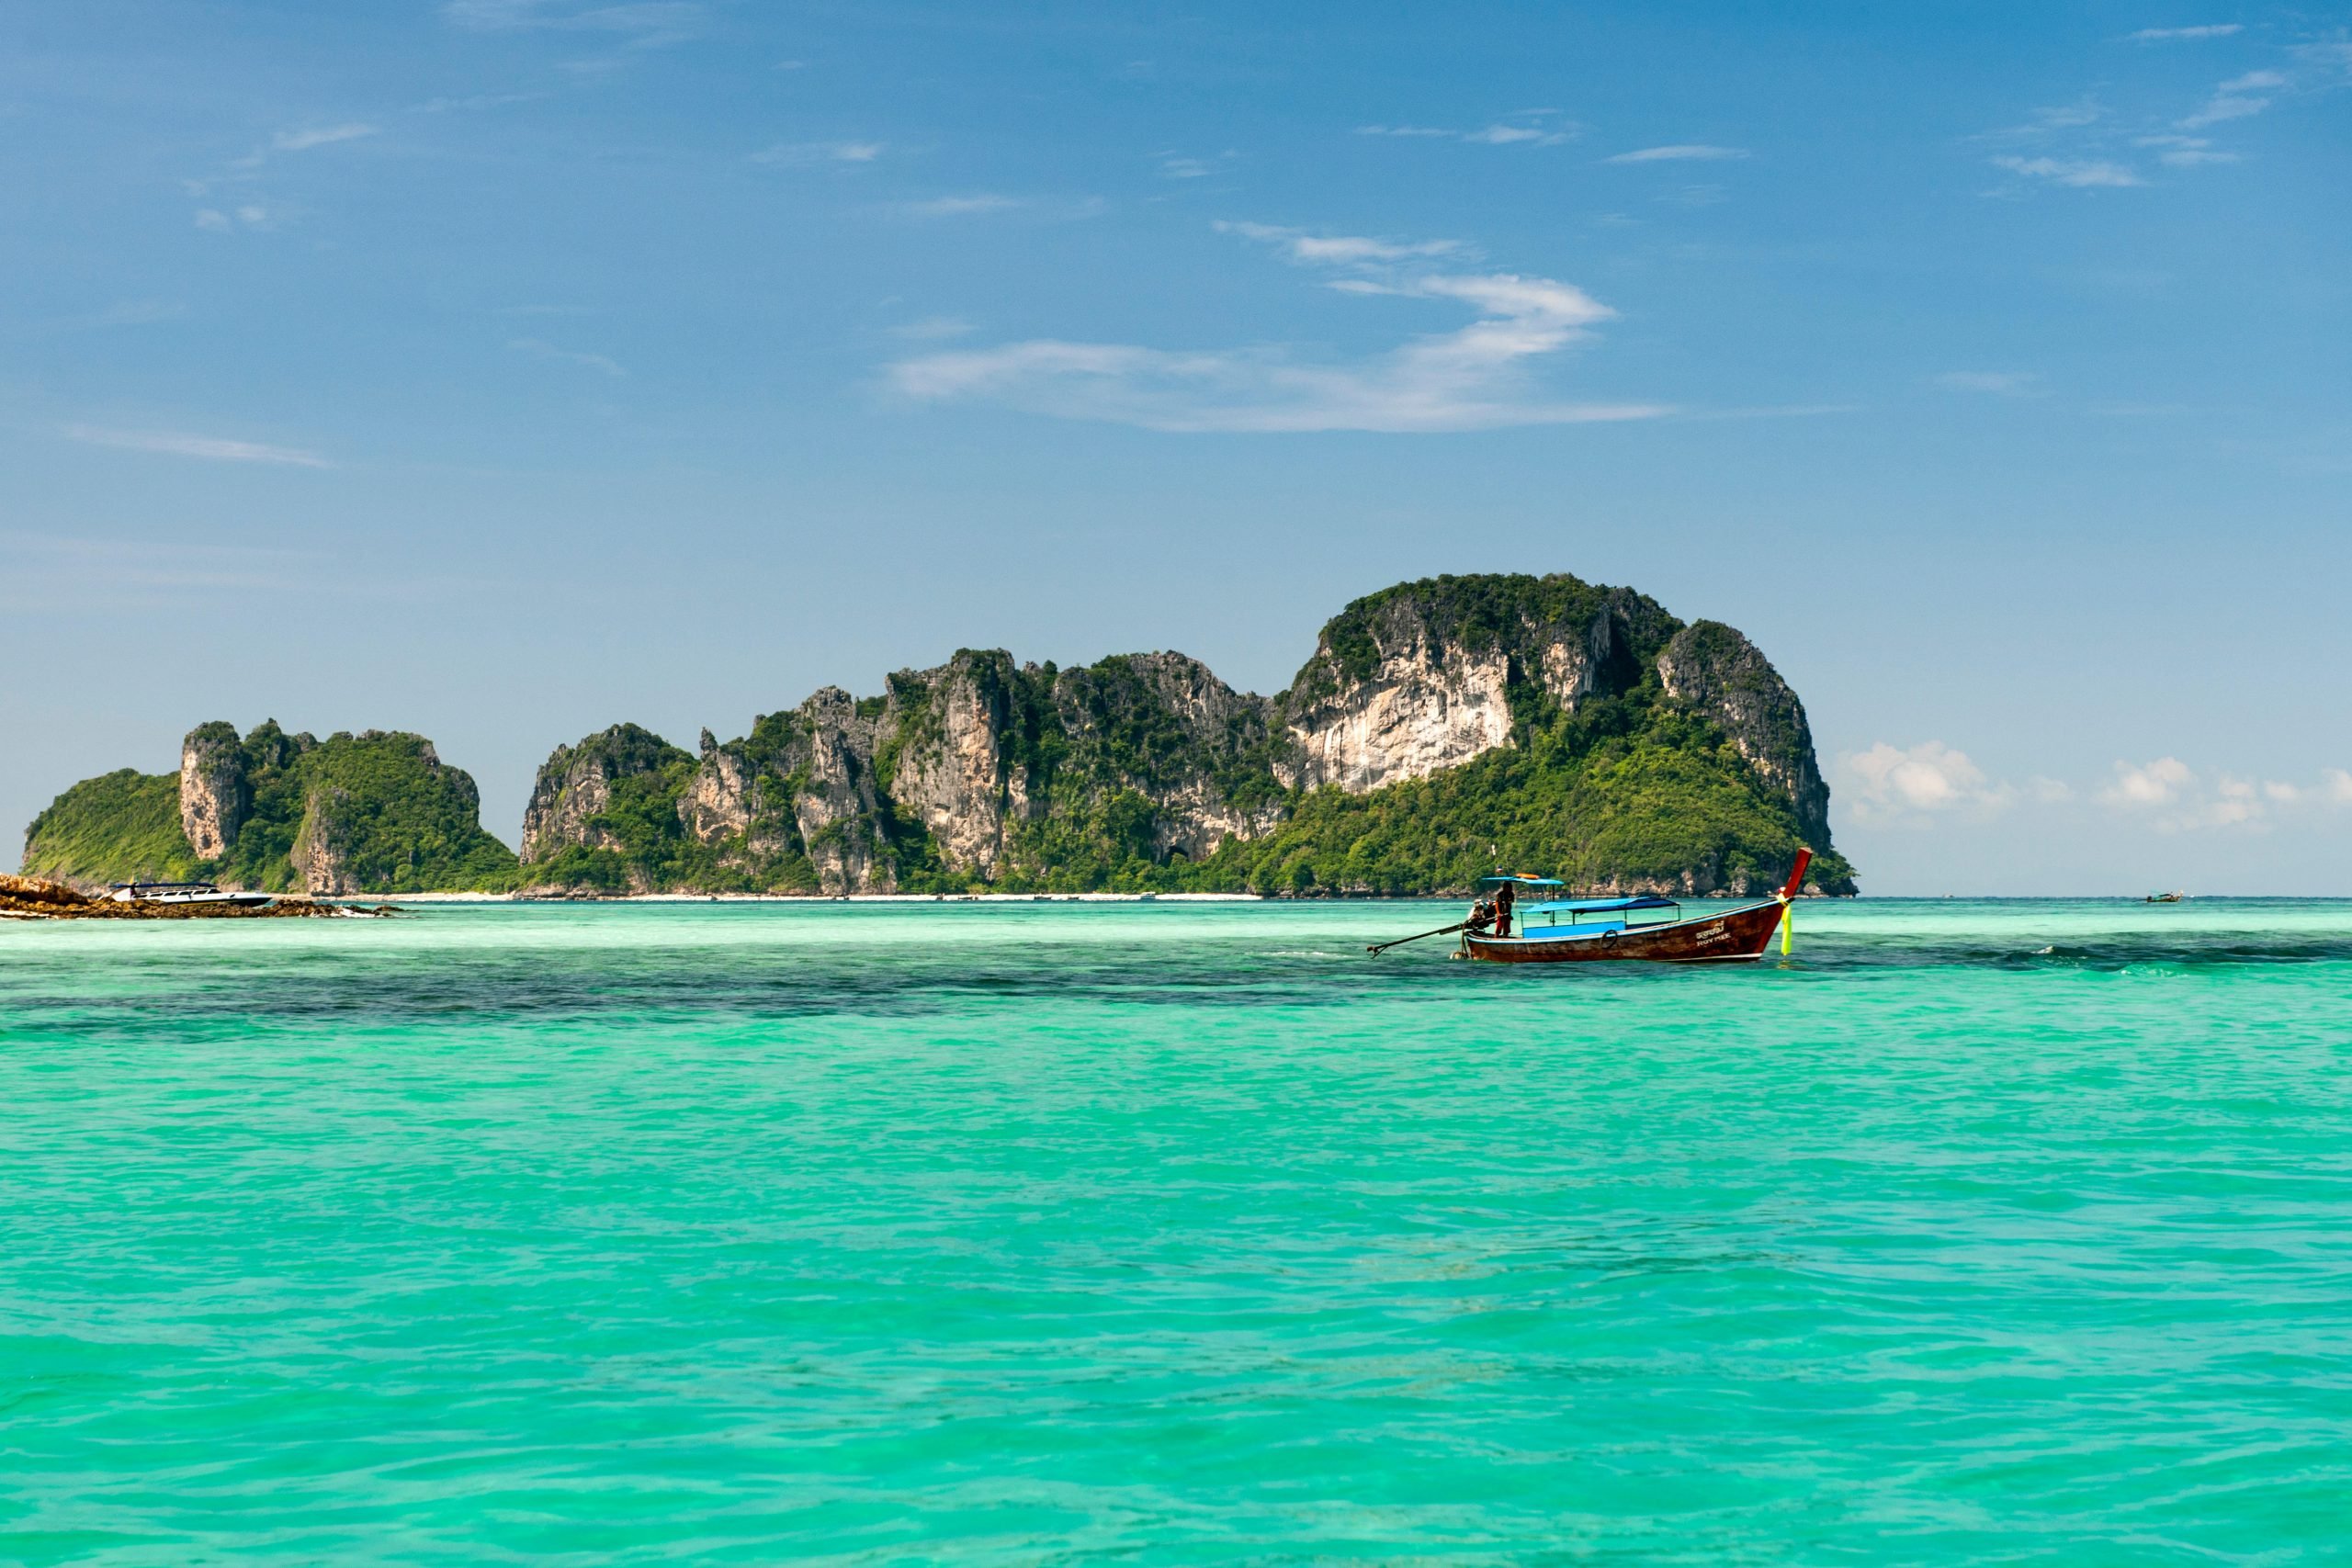 View of Mosquito island from Bamboo island (Ko Mai Phai) near Koh Phi Phi in the Andaman Sea on Thailand's west coast.